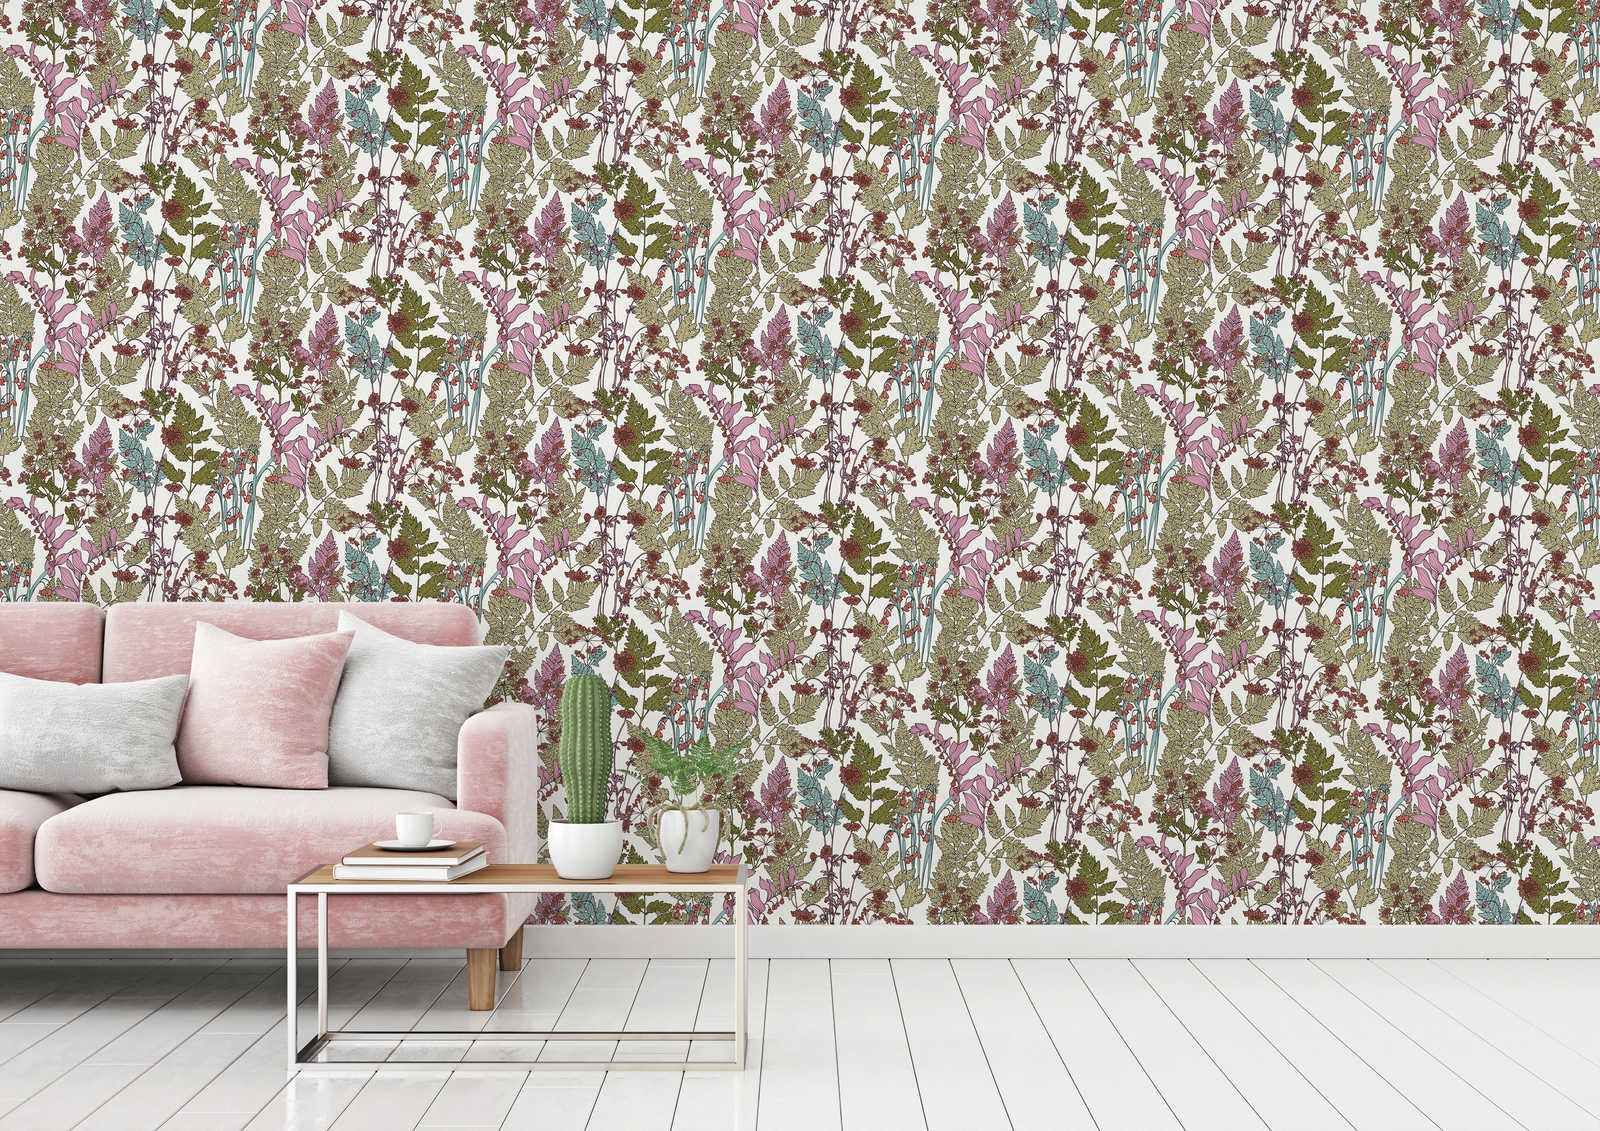             wallpaper leaves & flowers design in modern botanical style - colourful, green, blue
        